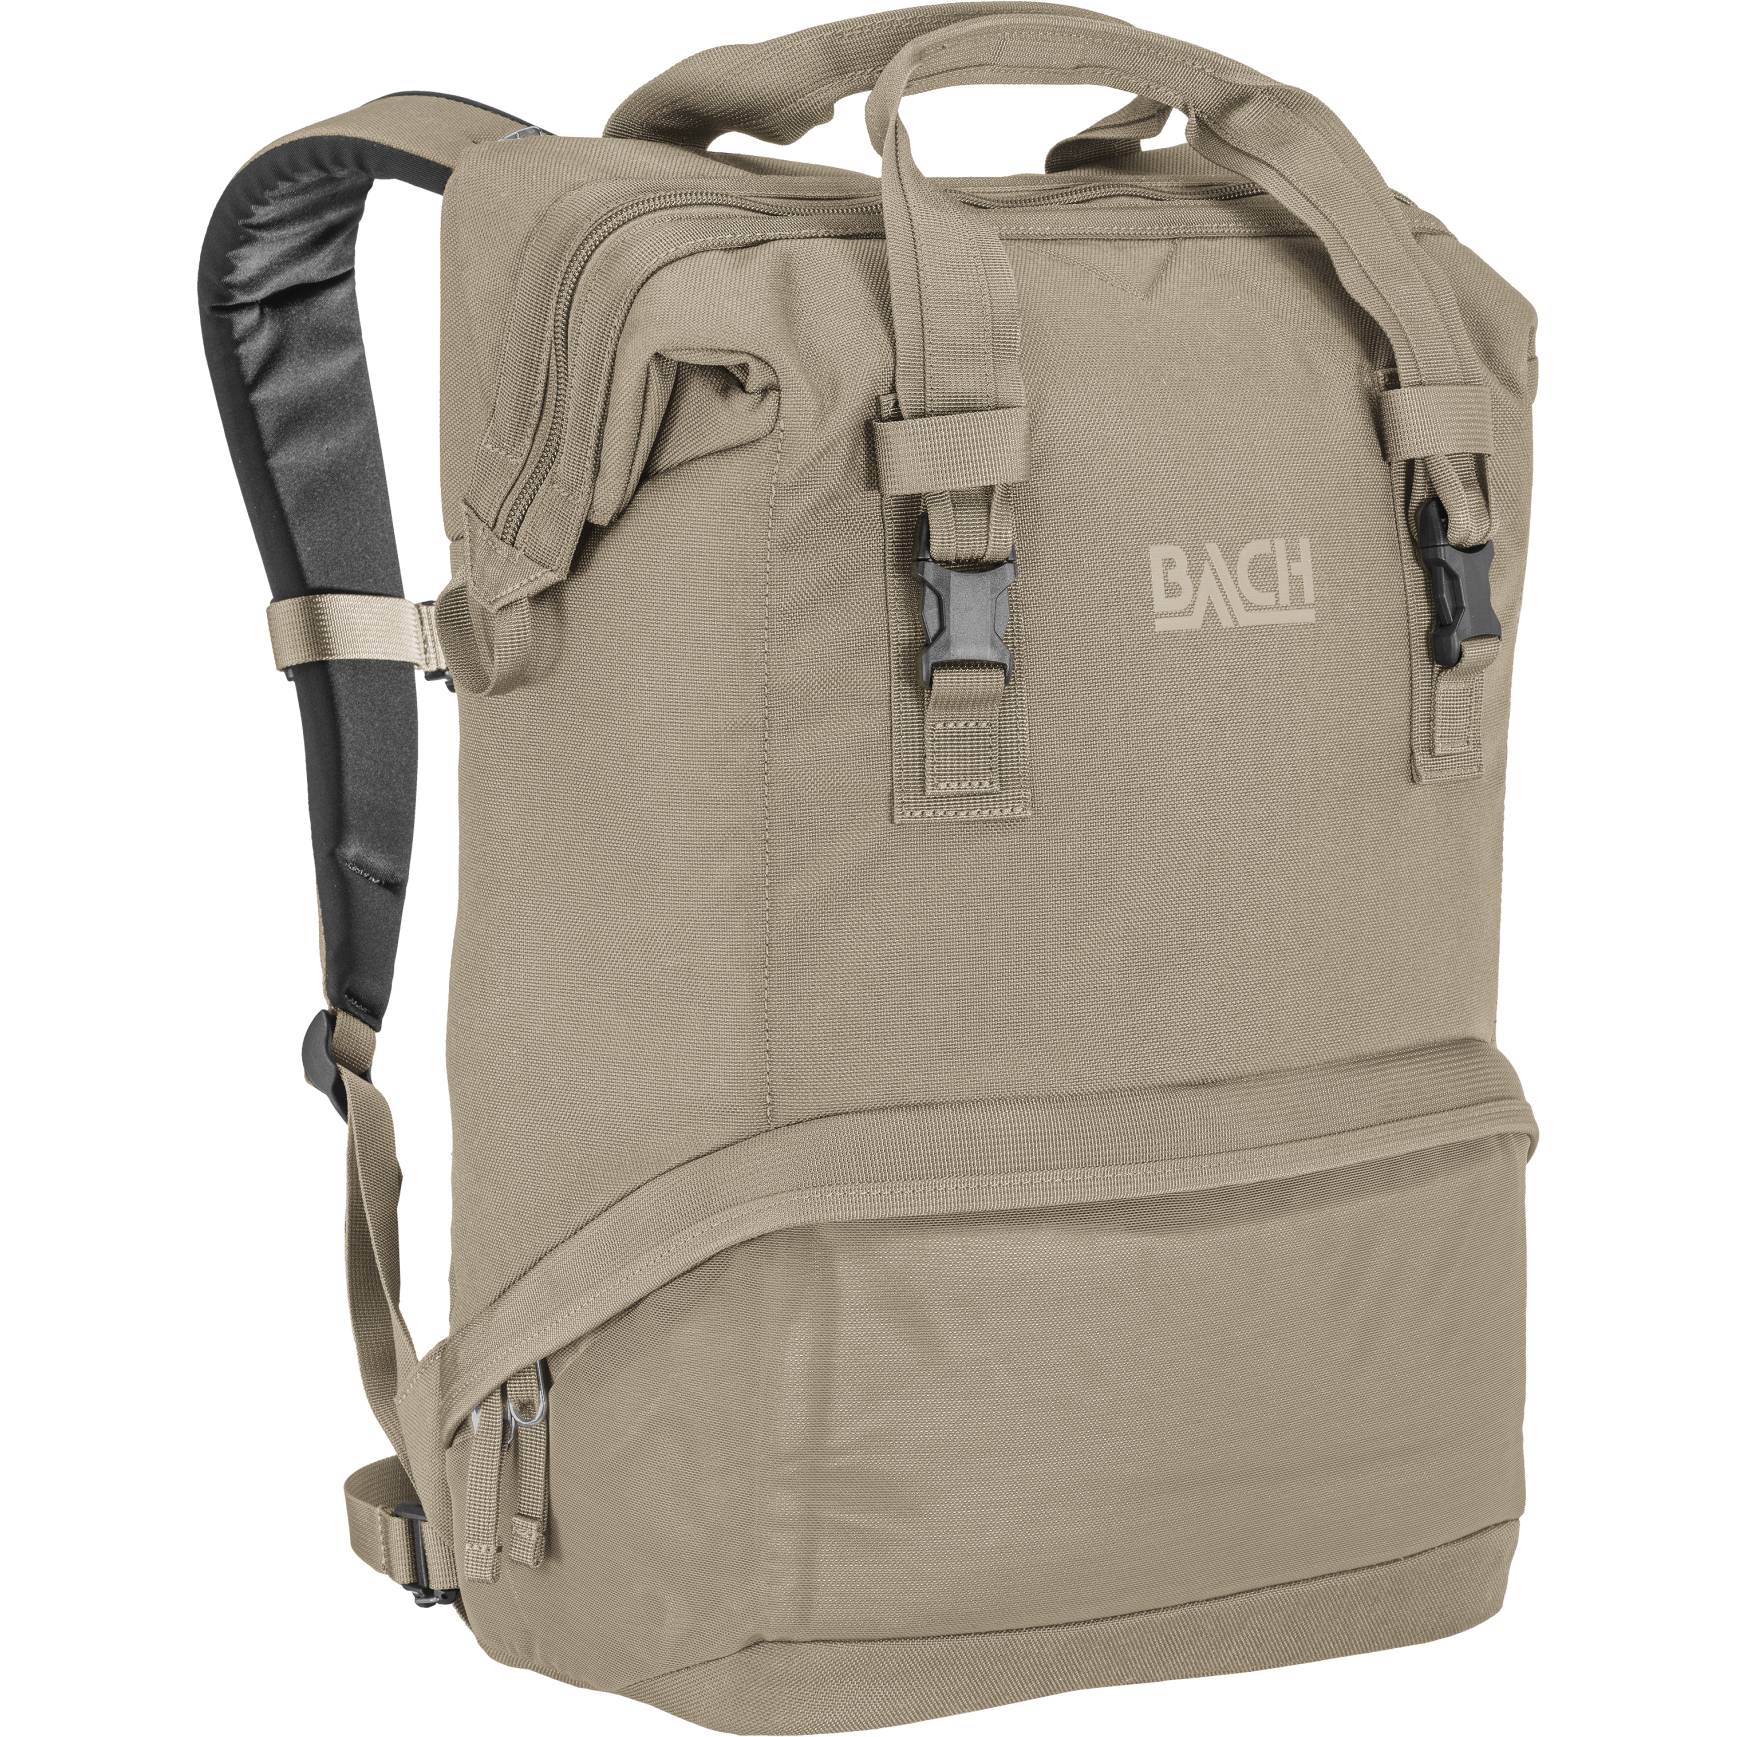 Picture of Bach Dr. Trackman 25 Backpack - sand beige